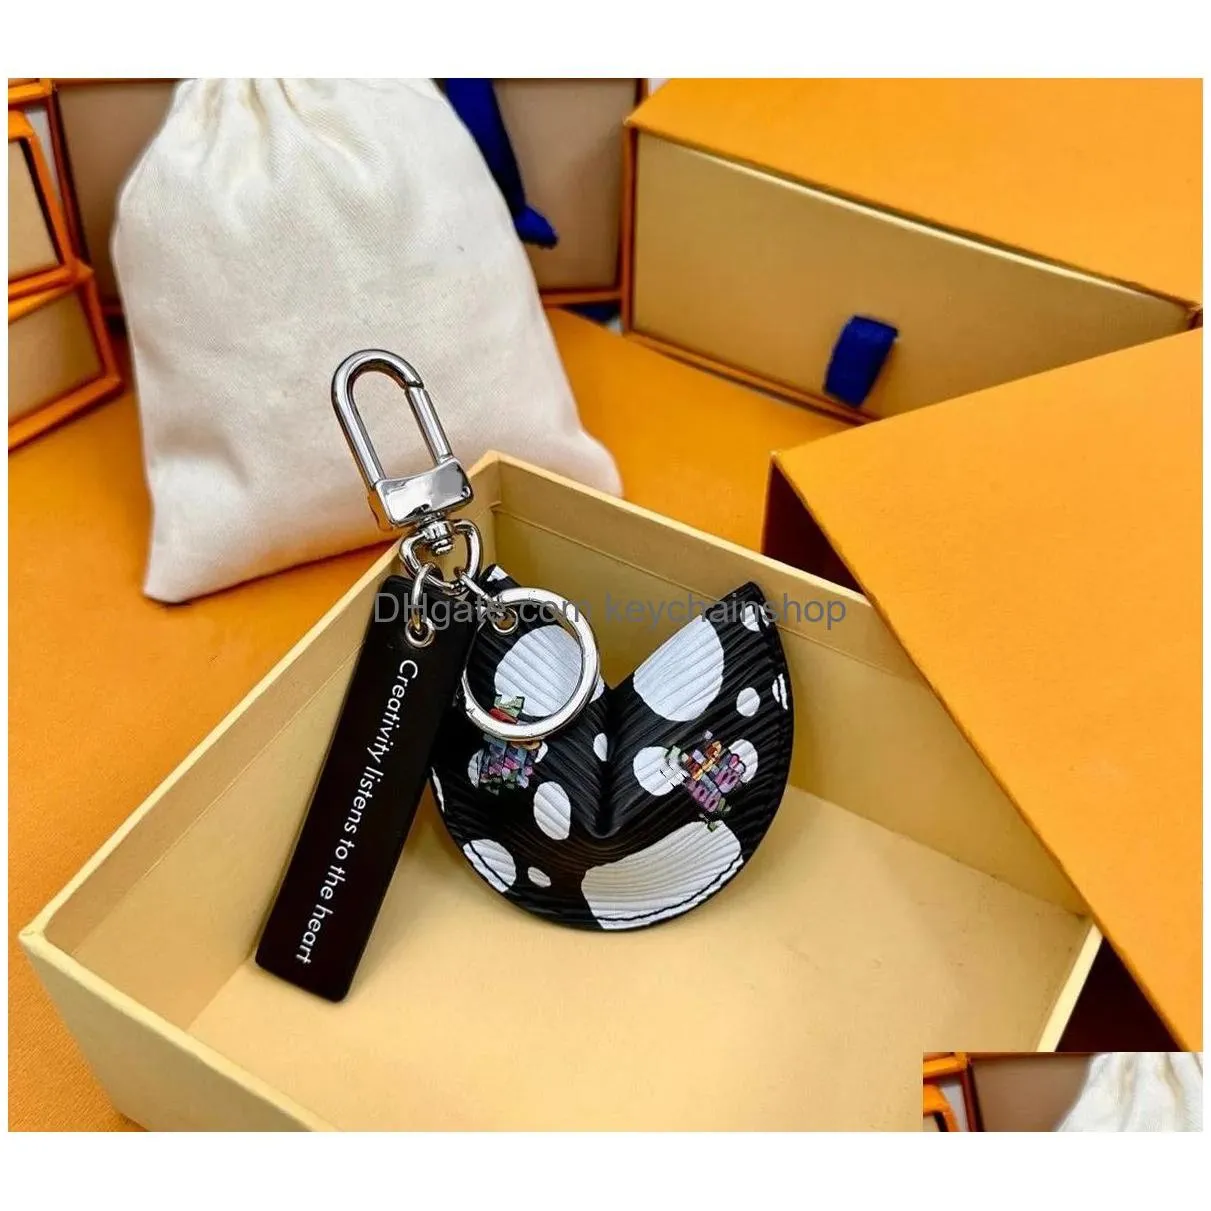 Keychains & Lanyards Keychains Lanyards Fortune Cookie Bag Hanging Car Flower Charm Jewelry Women Fashion Pu Leather Key Chain Access Dhn9J